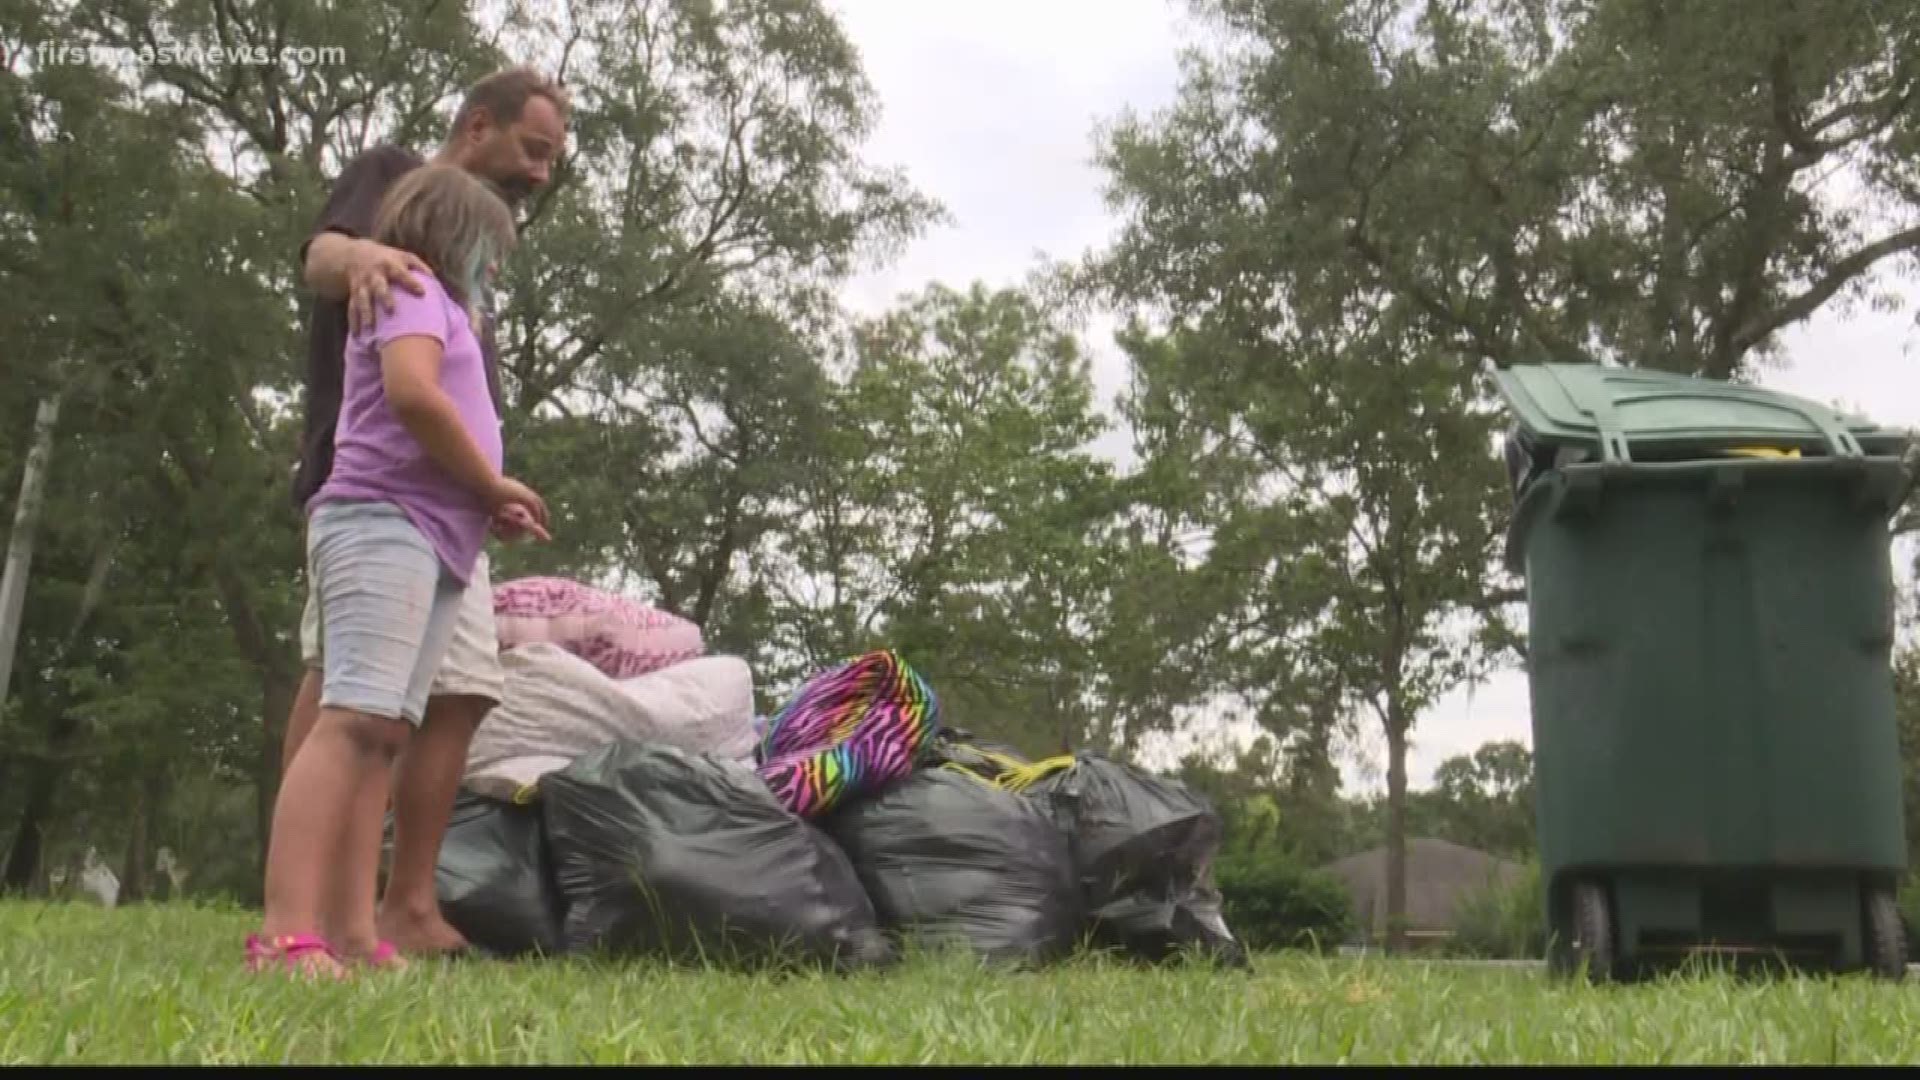 The city has received nearly 6,000 complaints in the past 30 days about delays in trash pickup.